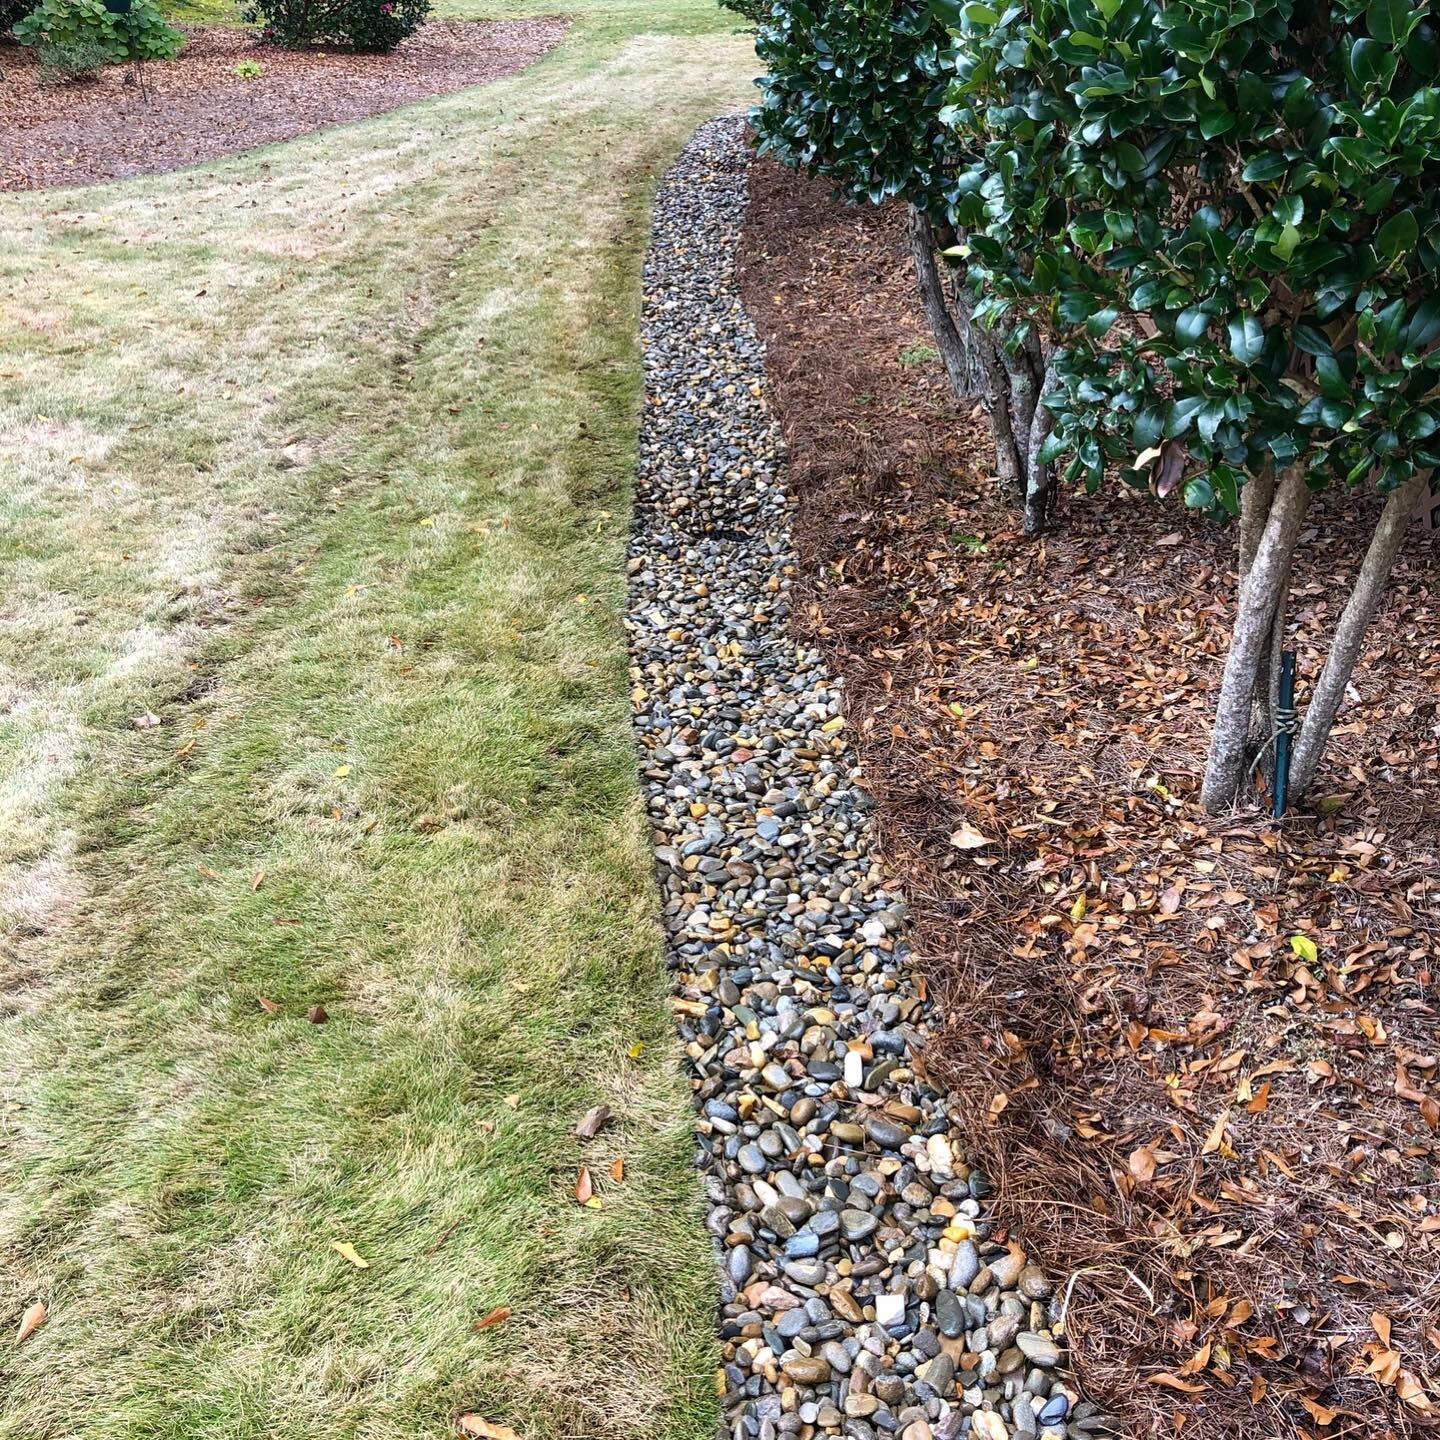 DRAINAGE:

These before &amp; afters show you how adding drainage rocks can provide function and aesthetics